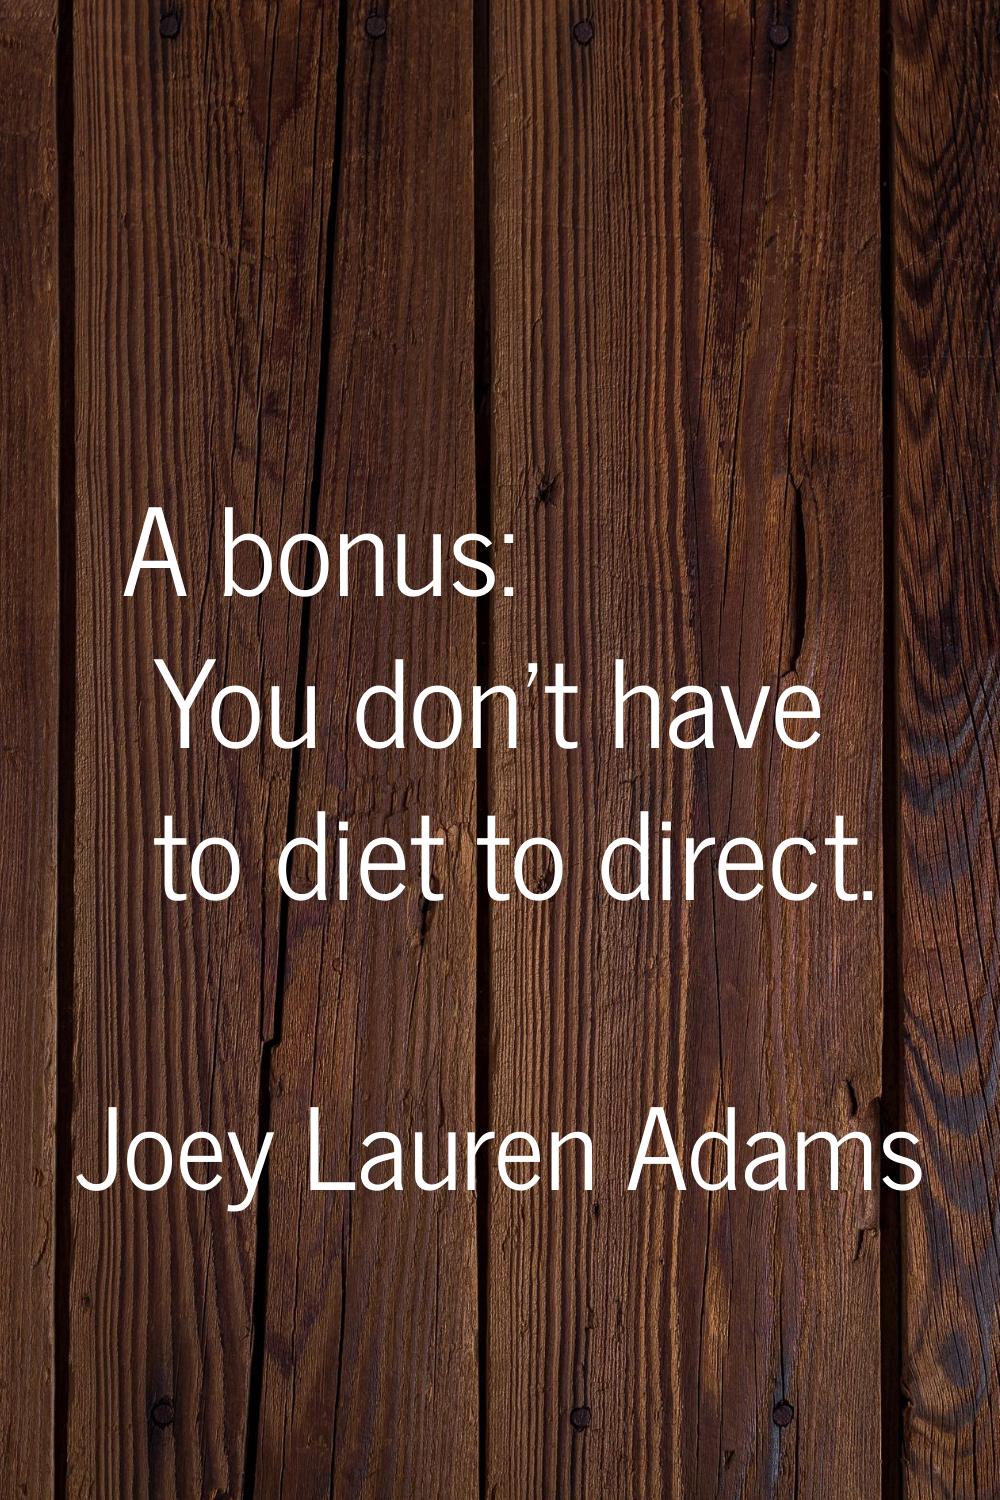 A bonus: You don't have to diet to direct.